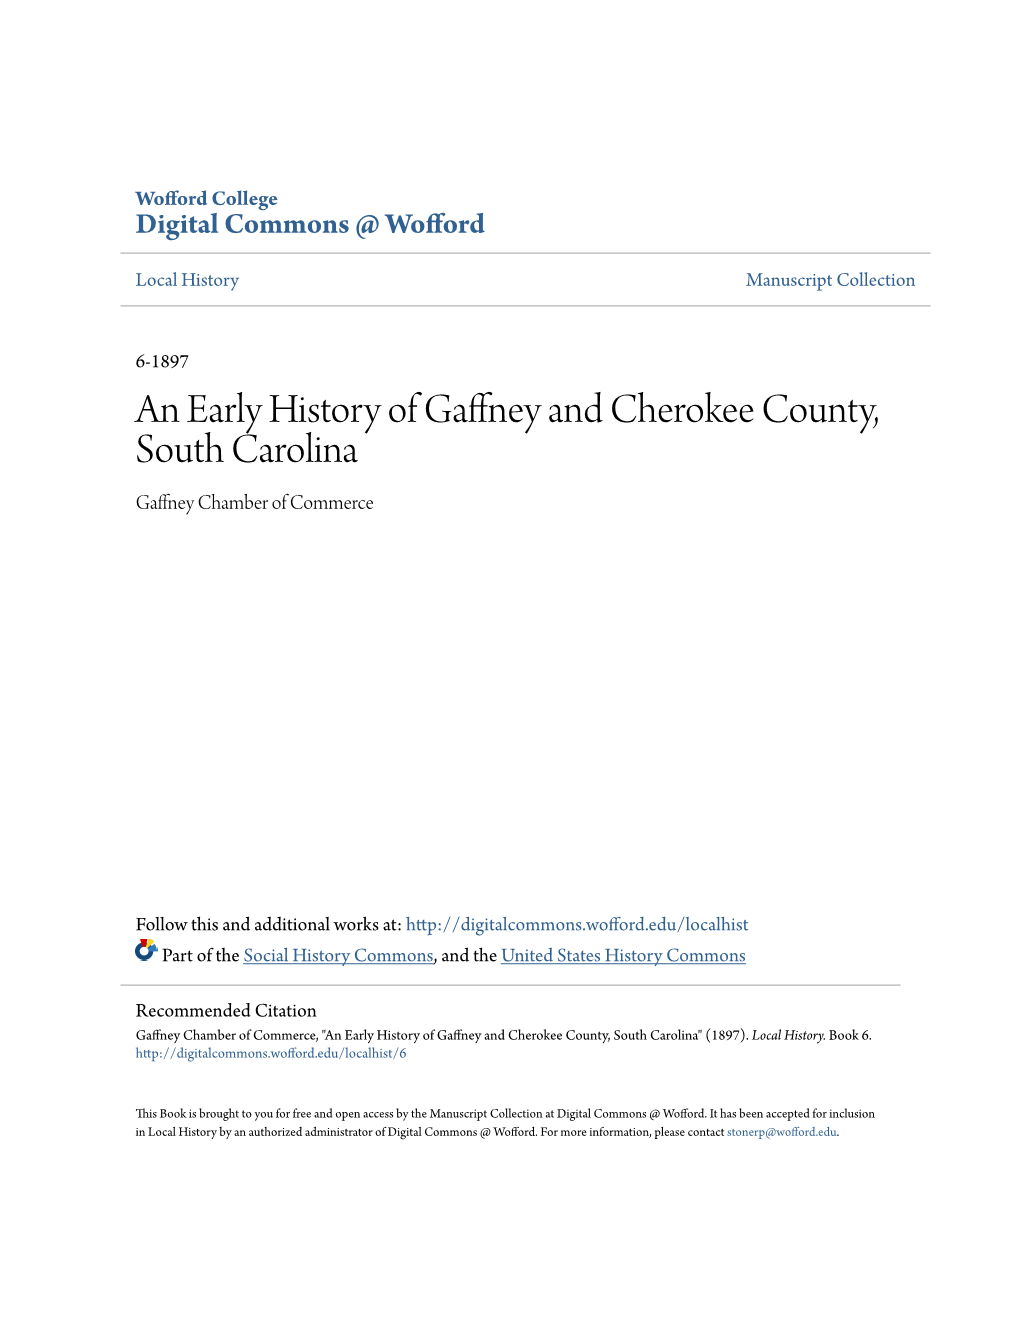 An Early History of Gaffney and Cherokee County, South Carolina Gaffney Chamber of Commerce